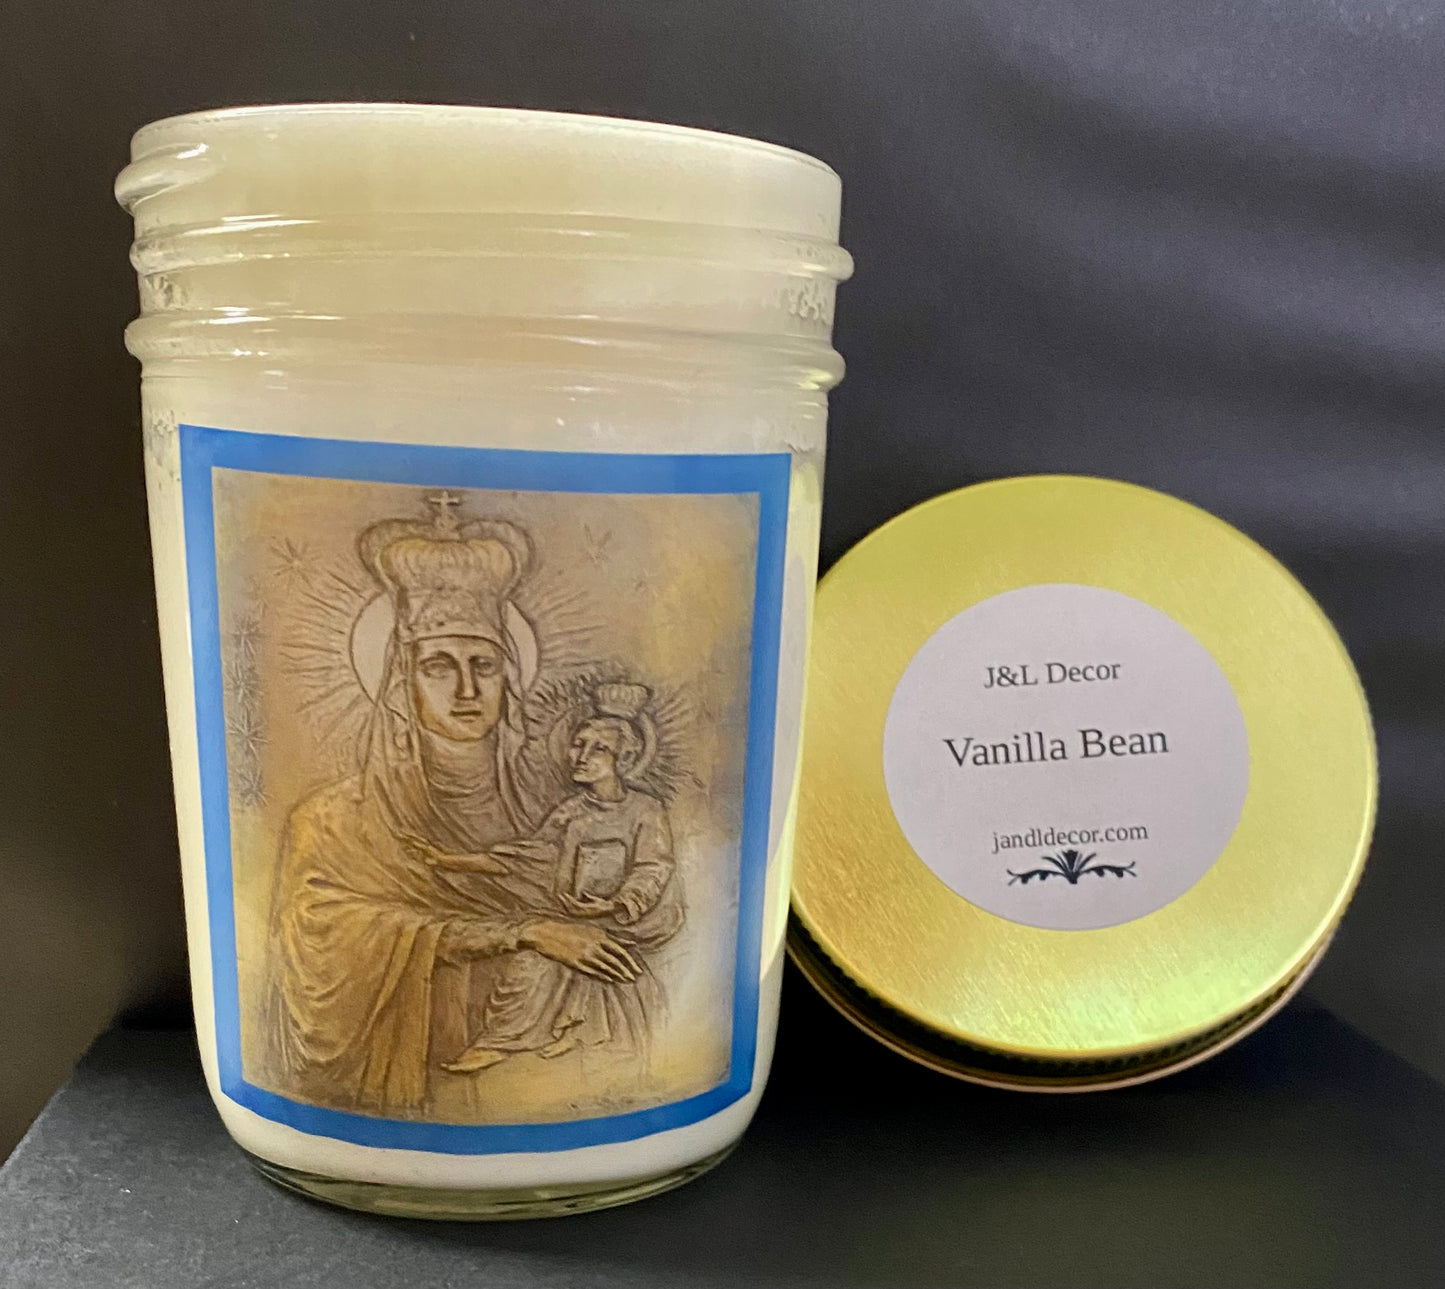 Our Lady of Siluva Jar Candle (3592)